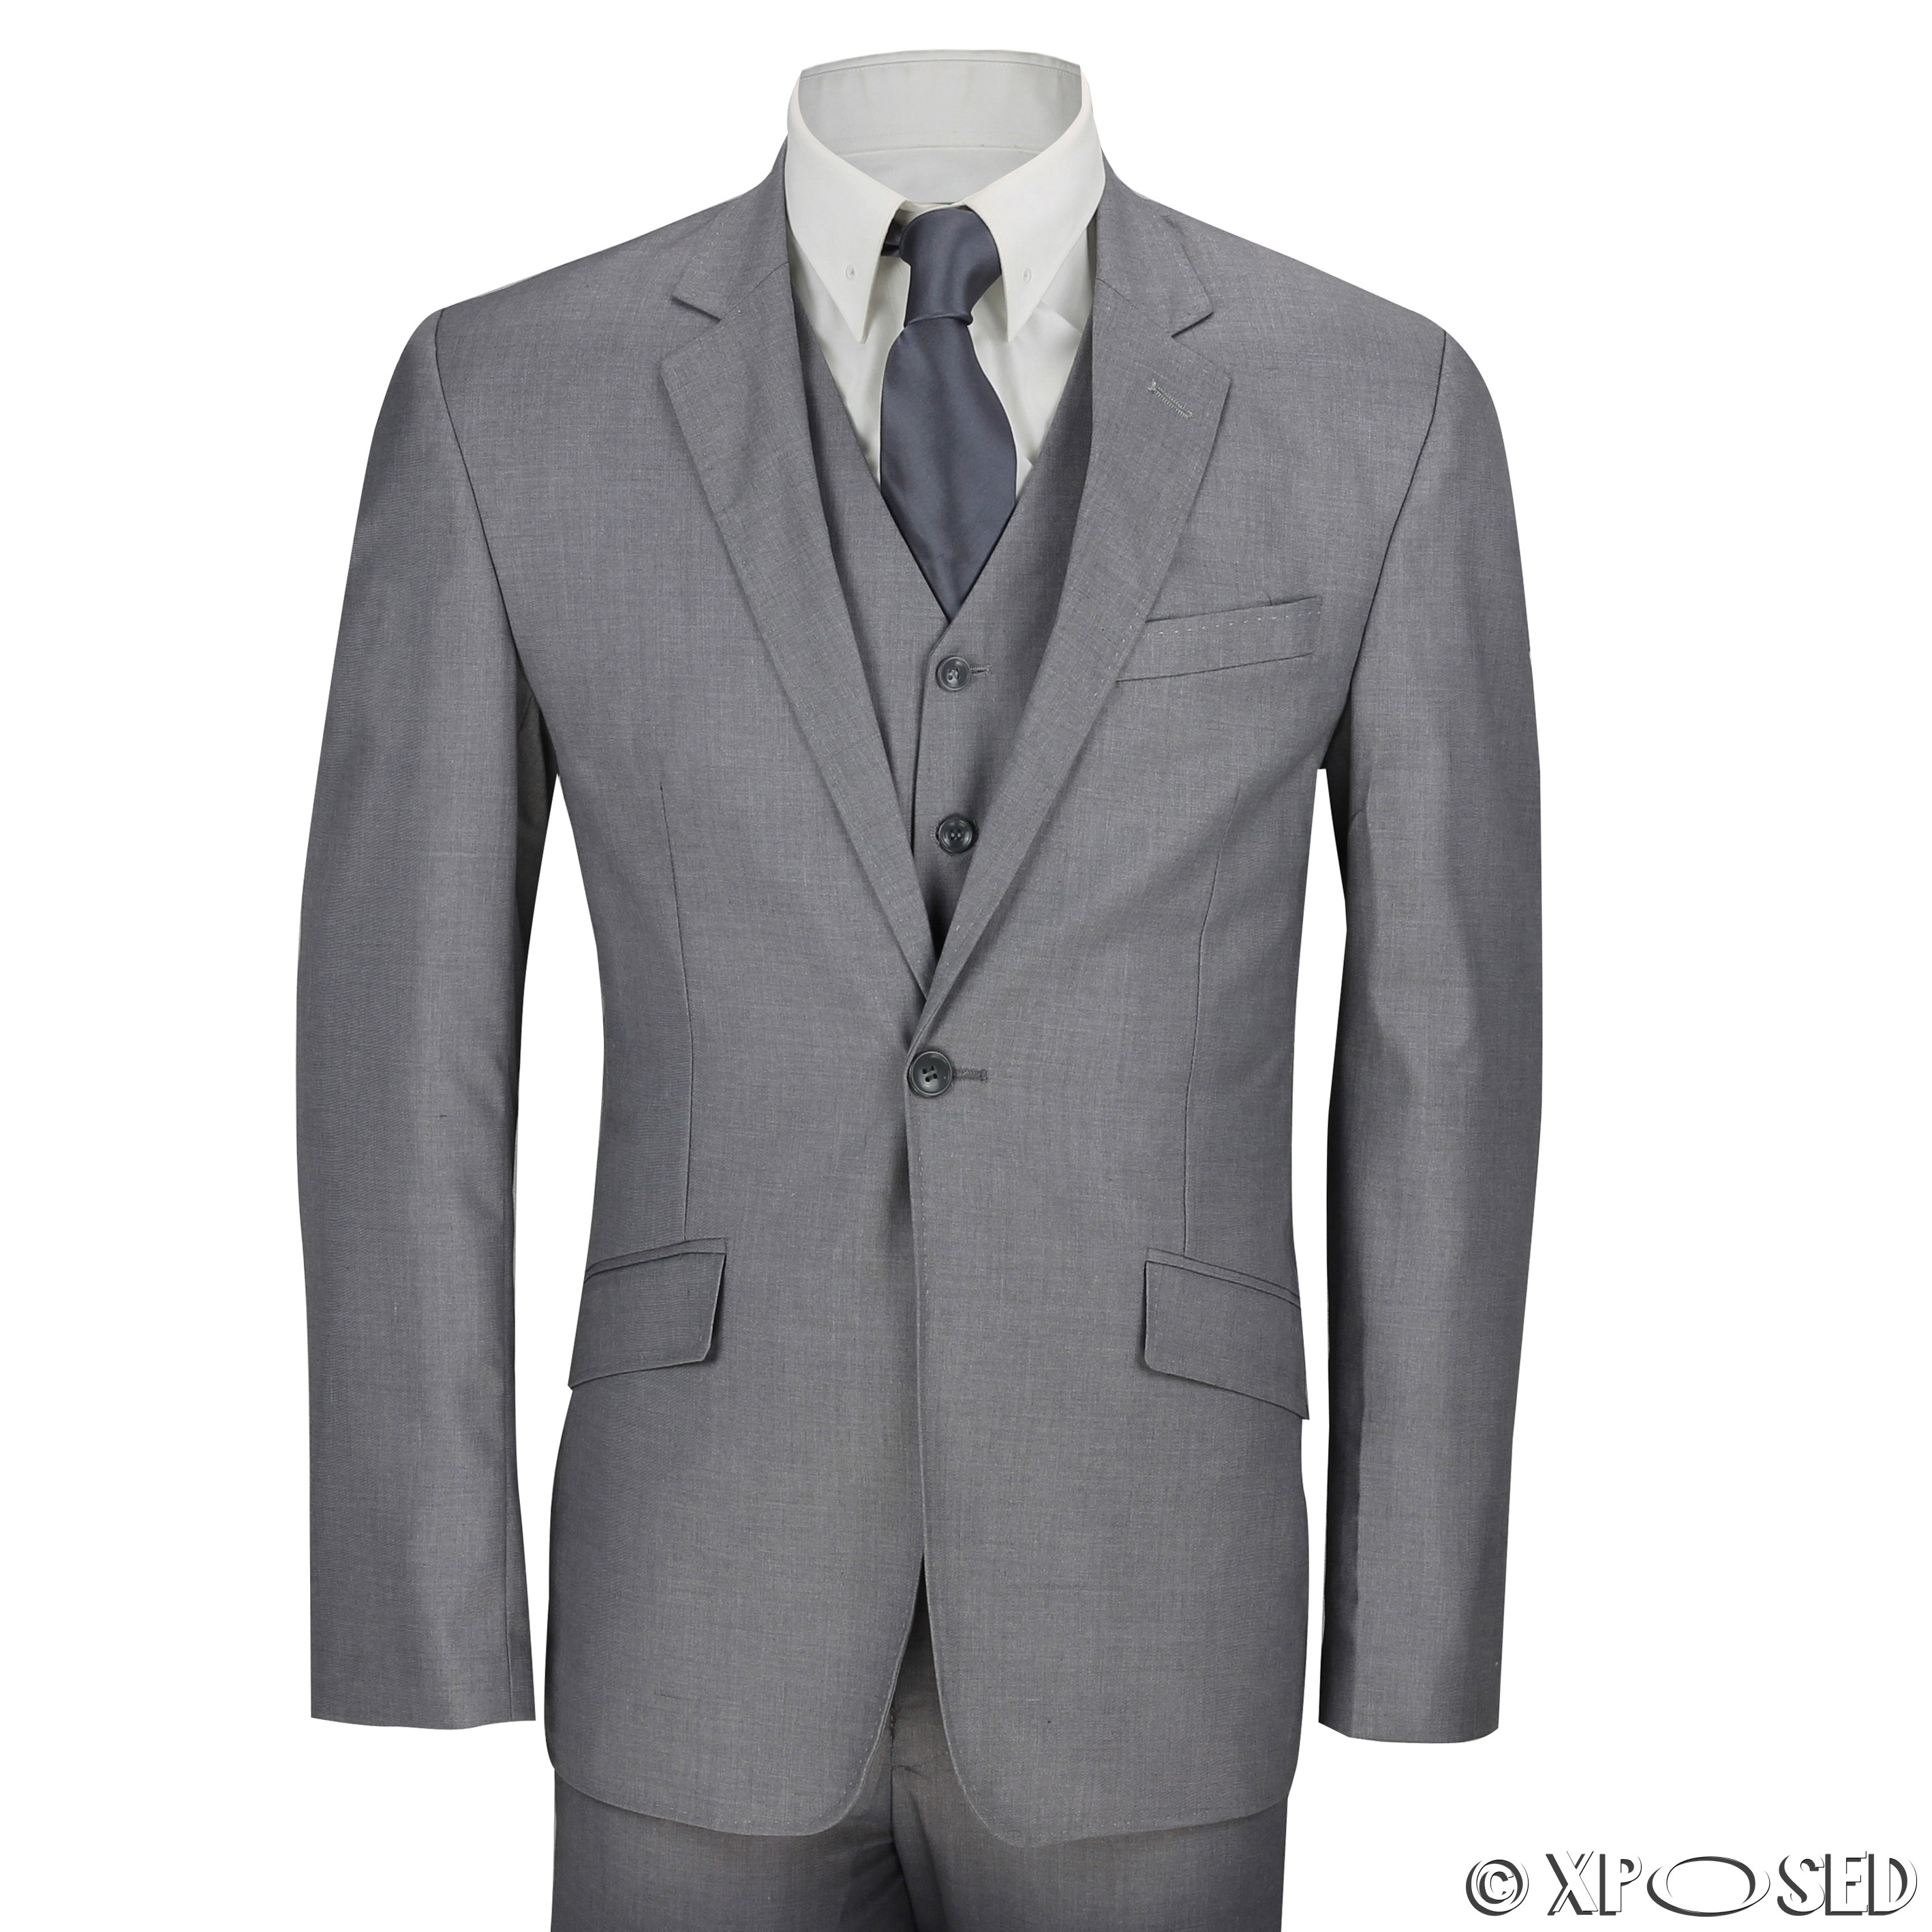 New Mens 3 Piece Suit Plain Grey Classic Tailored Fit Smart Casual